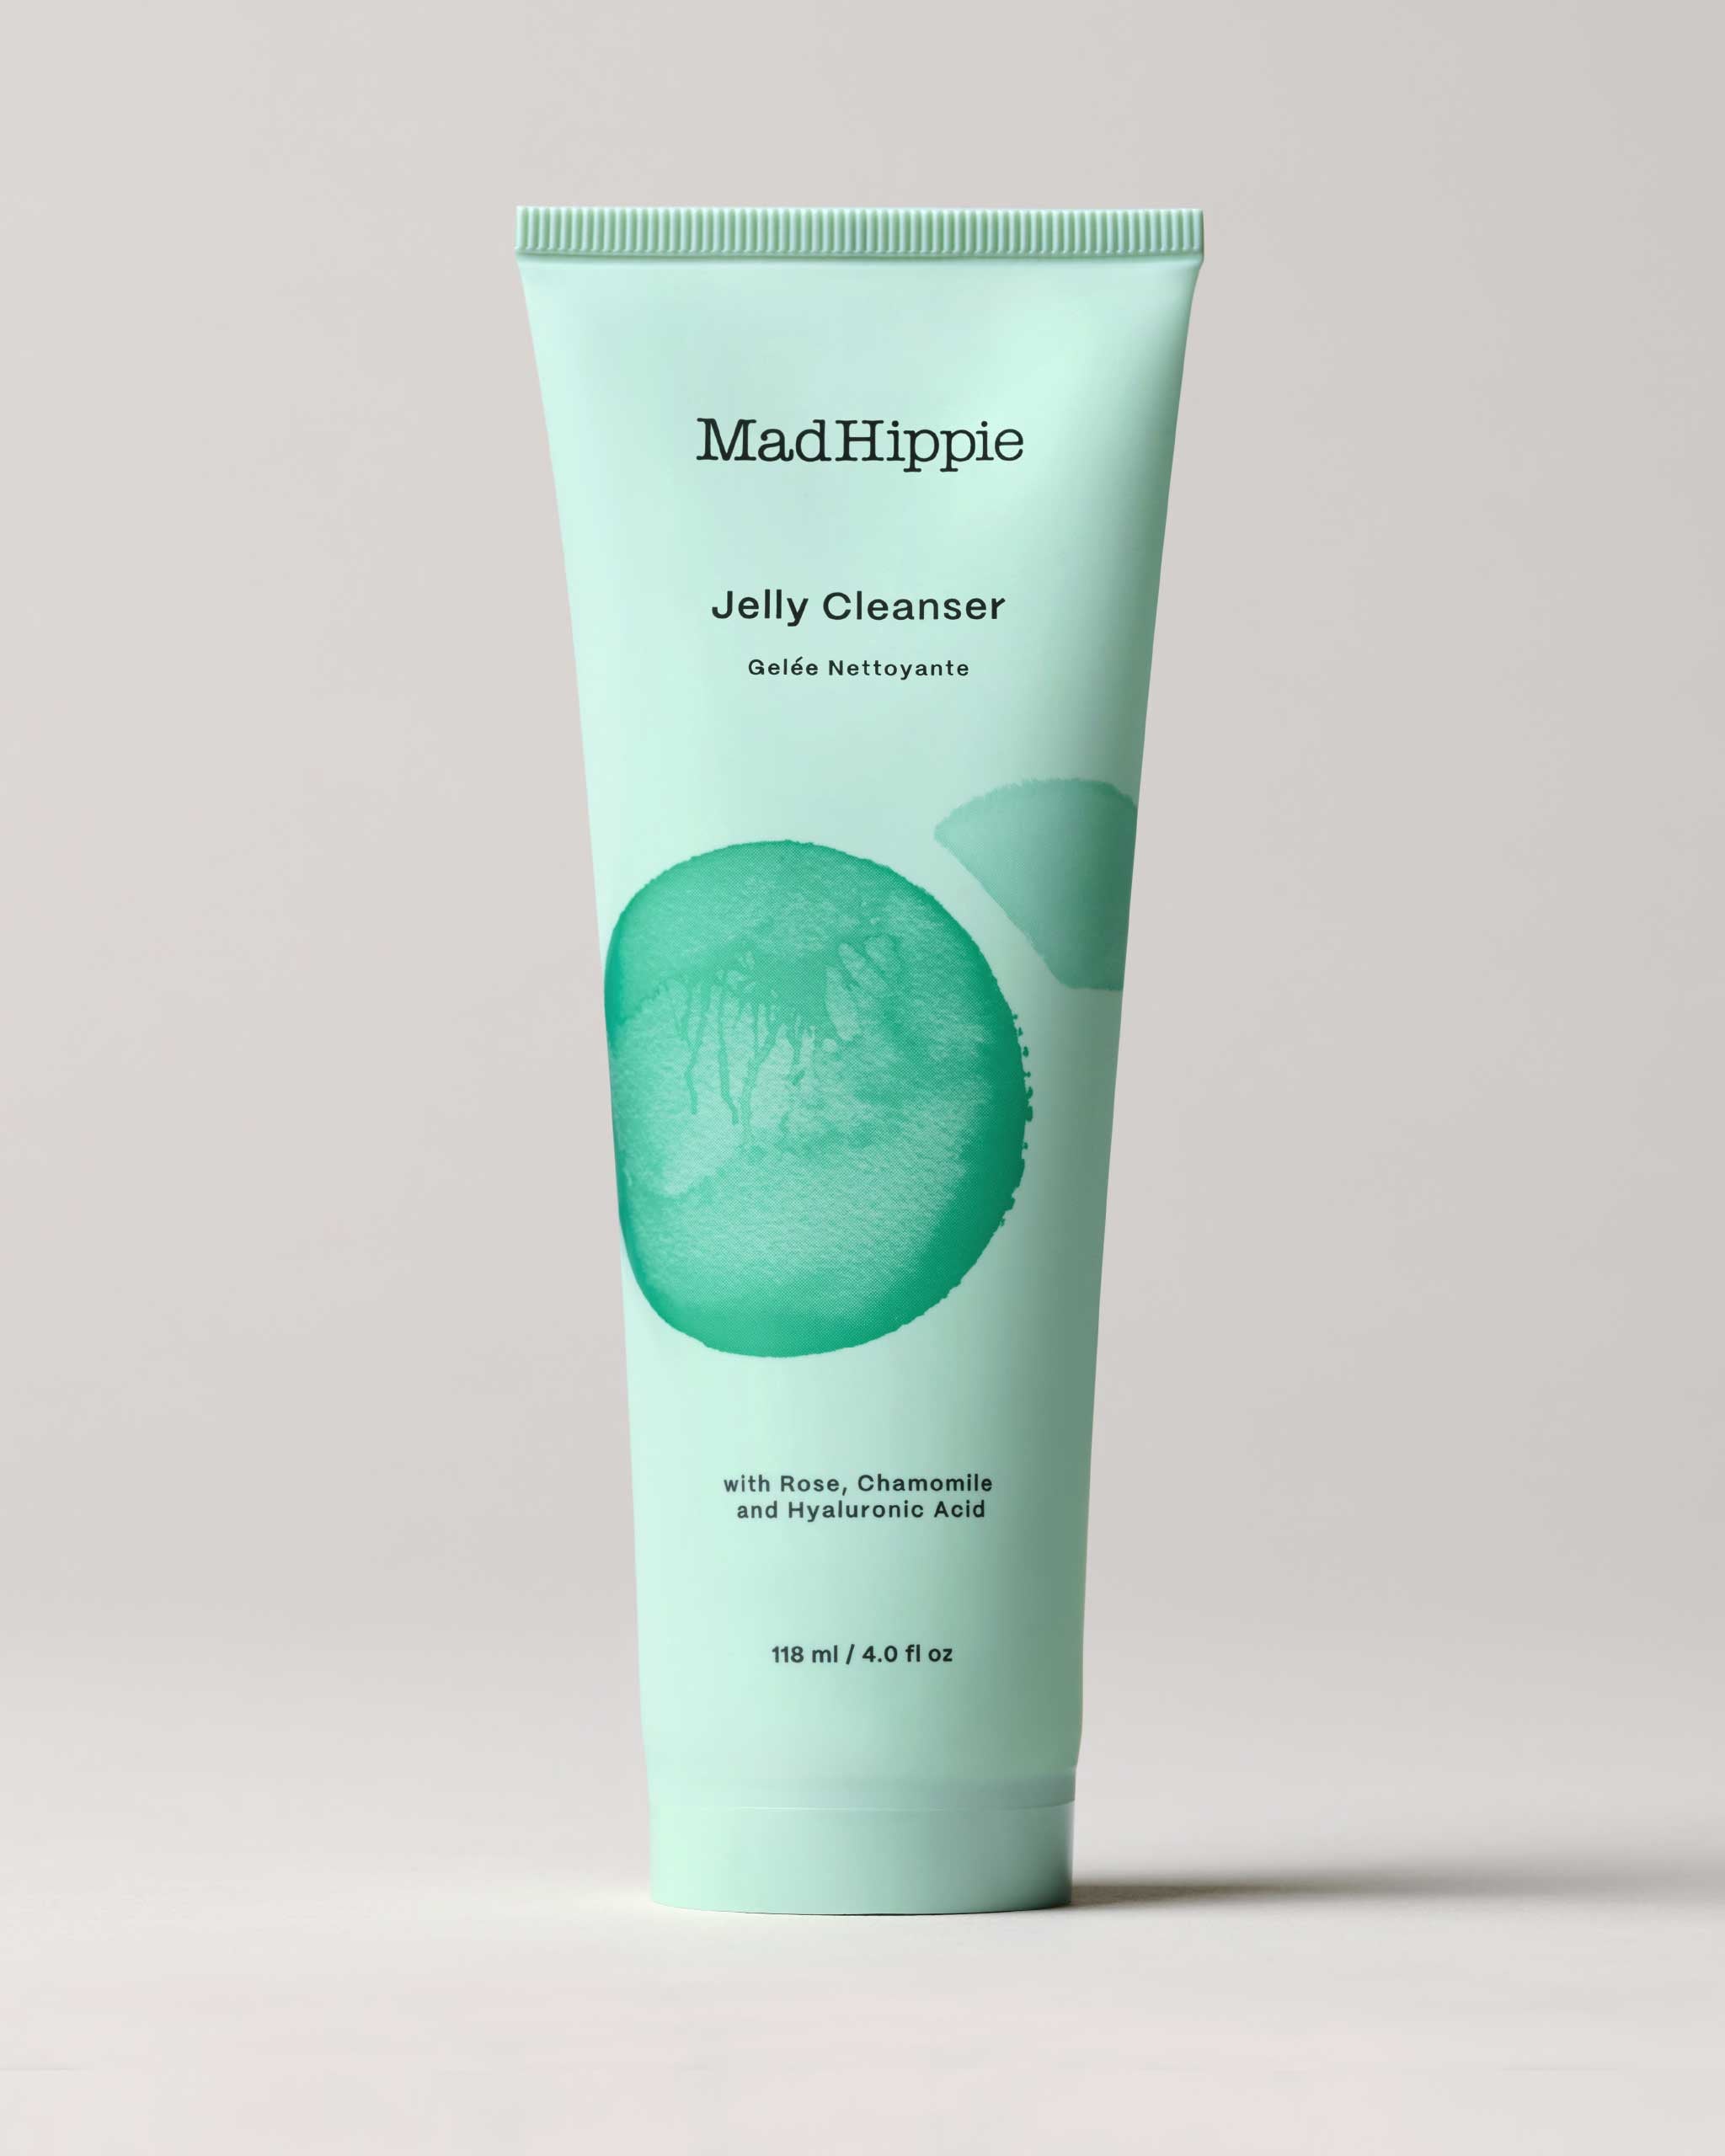 Jelly Cleanser - acidic facial cleanser